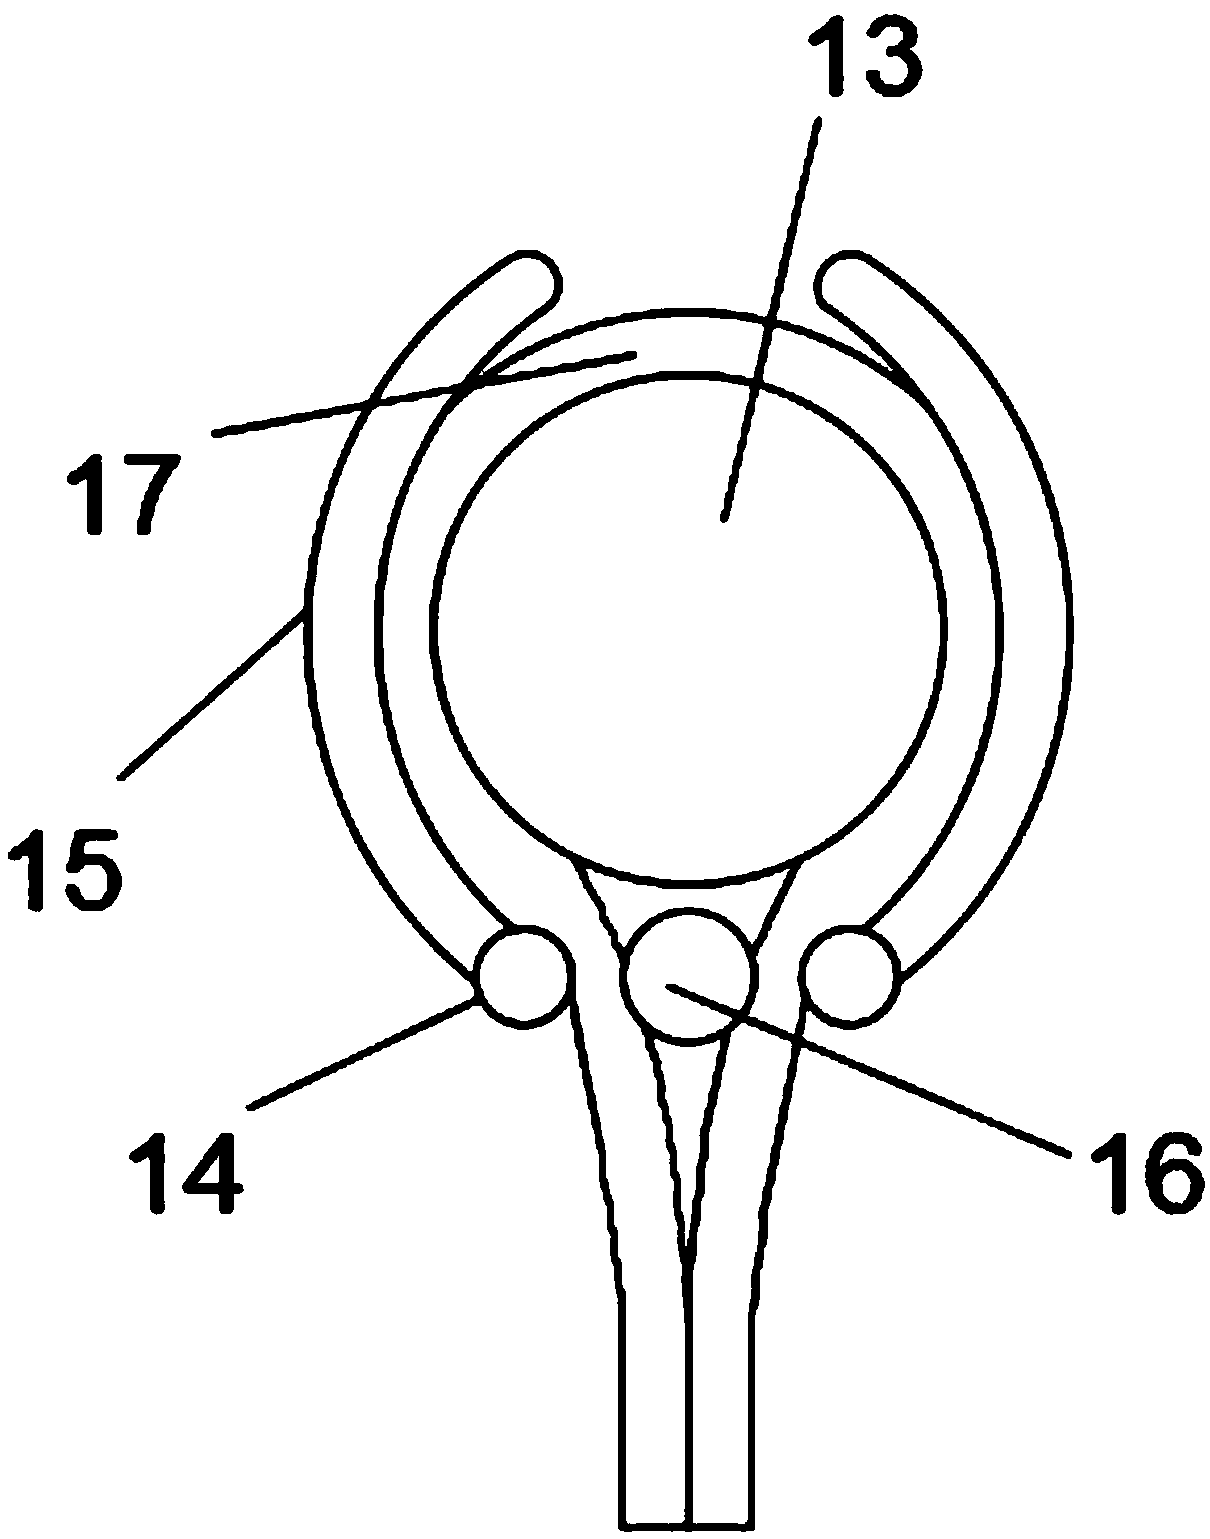 Numerical control manufactured machine tool for cable assembly and cable assembly method